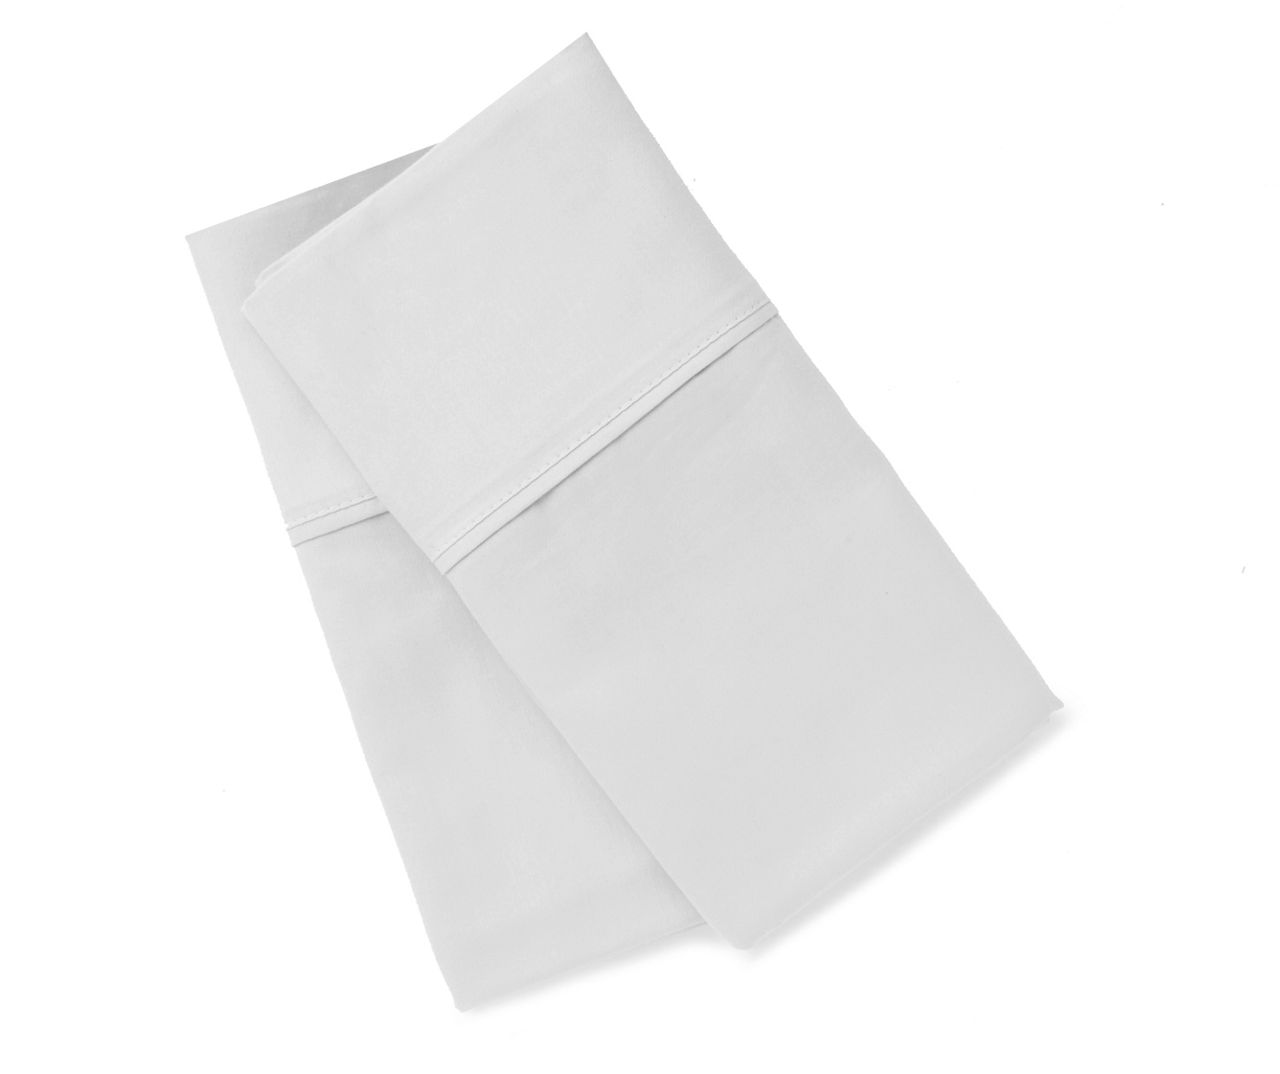 Silver 300 Thread Count King Pillowcases, 2-Pack